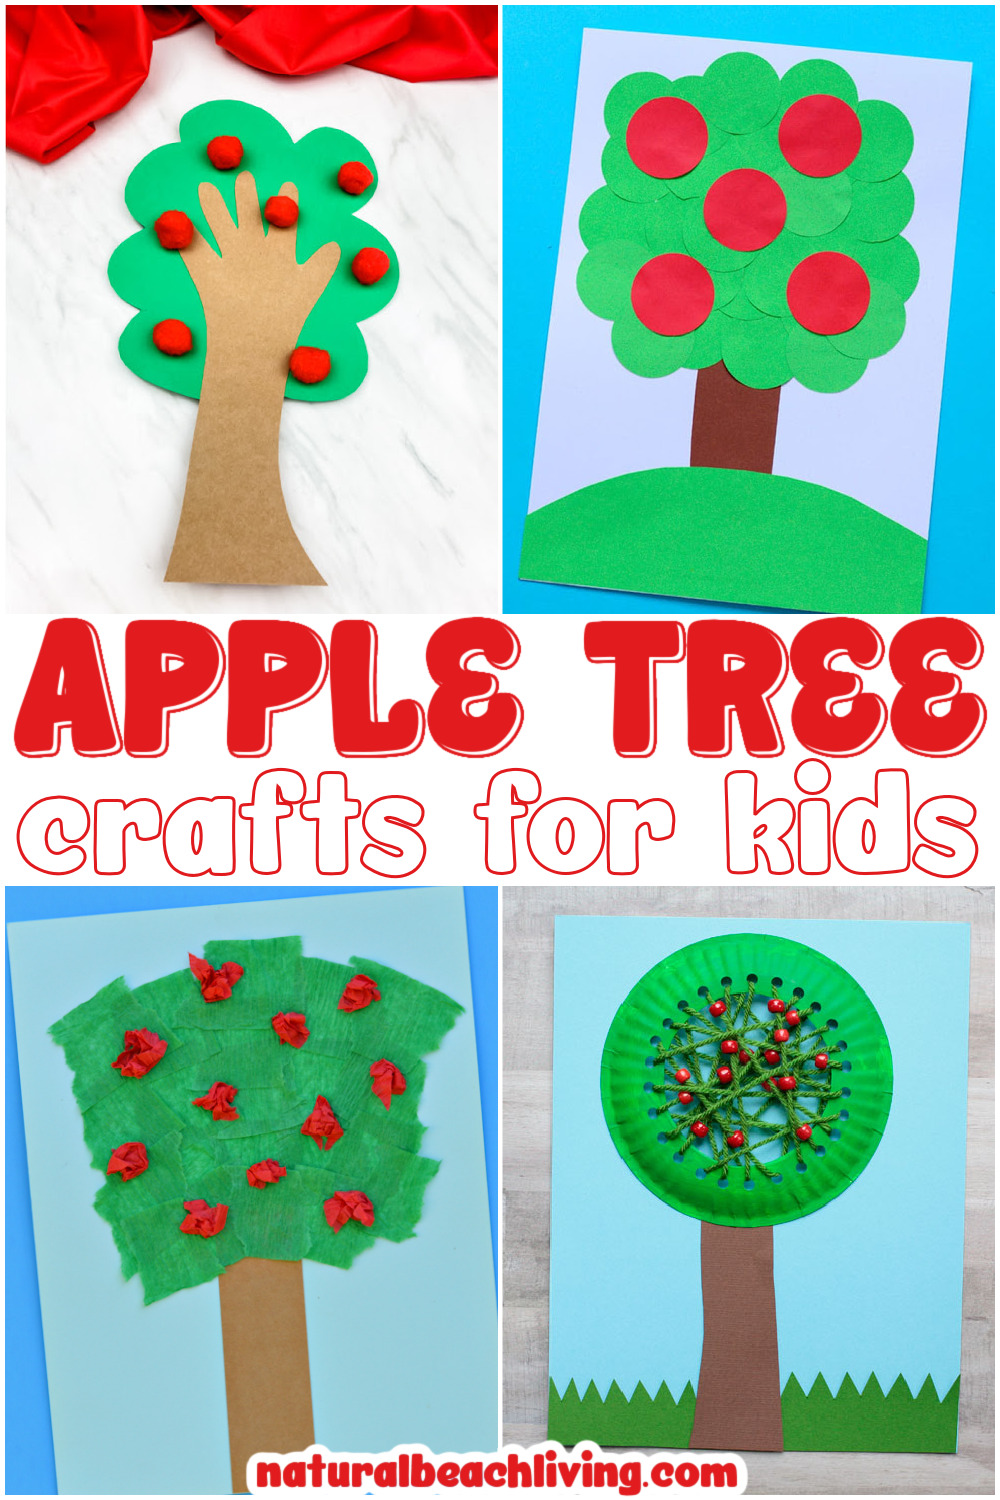 Get prepared this fall with The Best Johnny Appleseed Activities. Amazing Johnny Appleseed Lesson Plans for Kindergarten, Preschool and early elementary. Including Johnny Appleseed Printables, Crafts, and lots of ways to celebrate Johnny Appleseed Day!